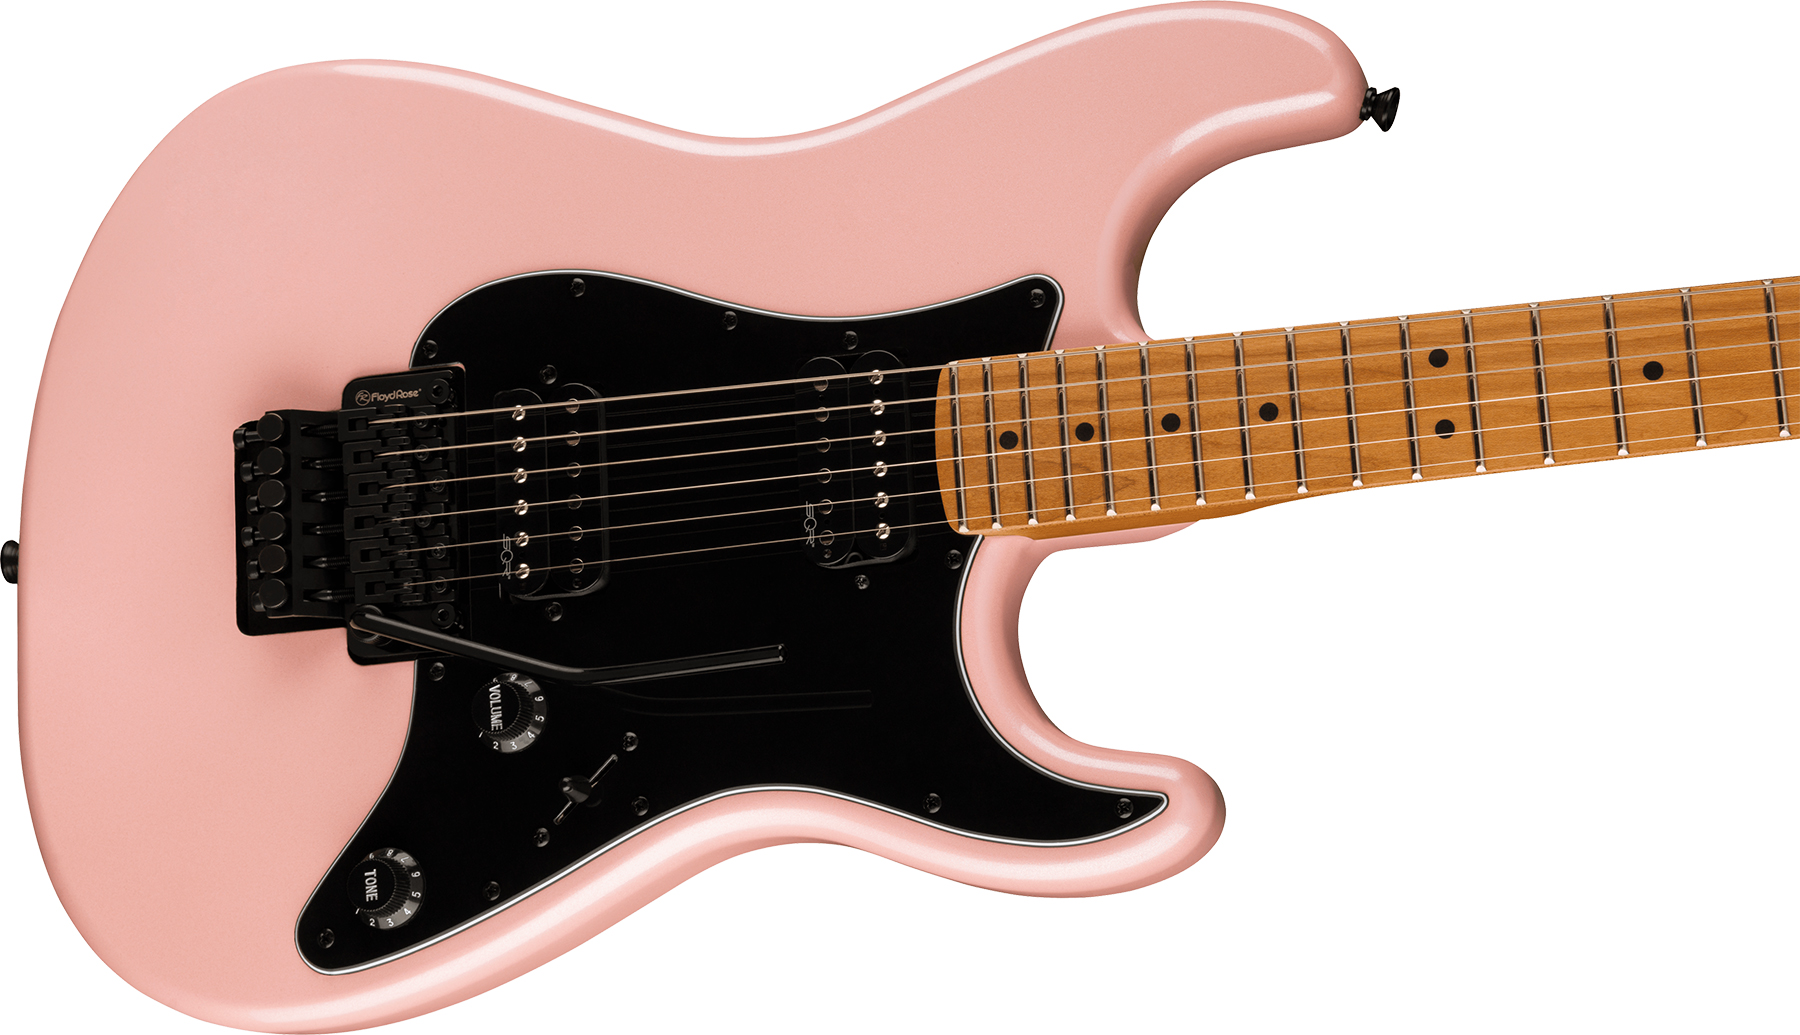 Squier Strat Contemporary Hh Fr Mn - Shell Pink Pearl - Str shape electric guitar - Variation 2